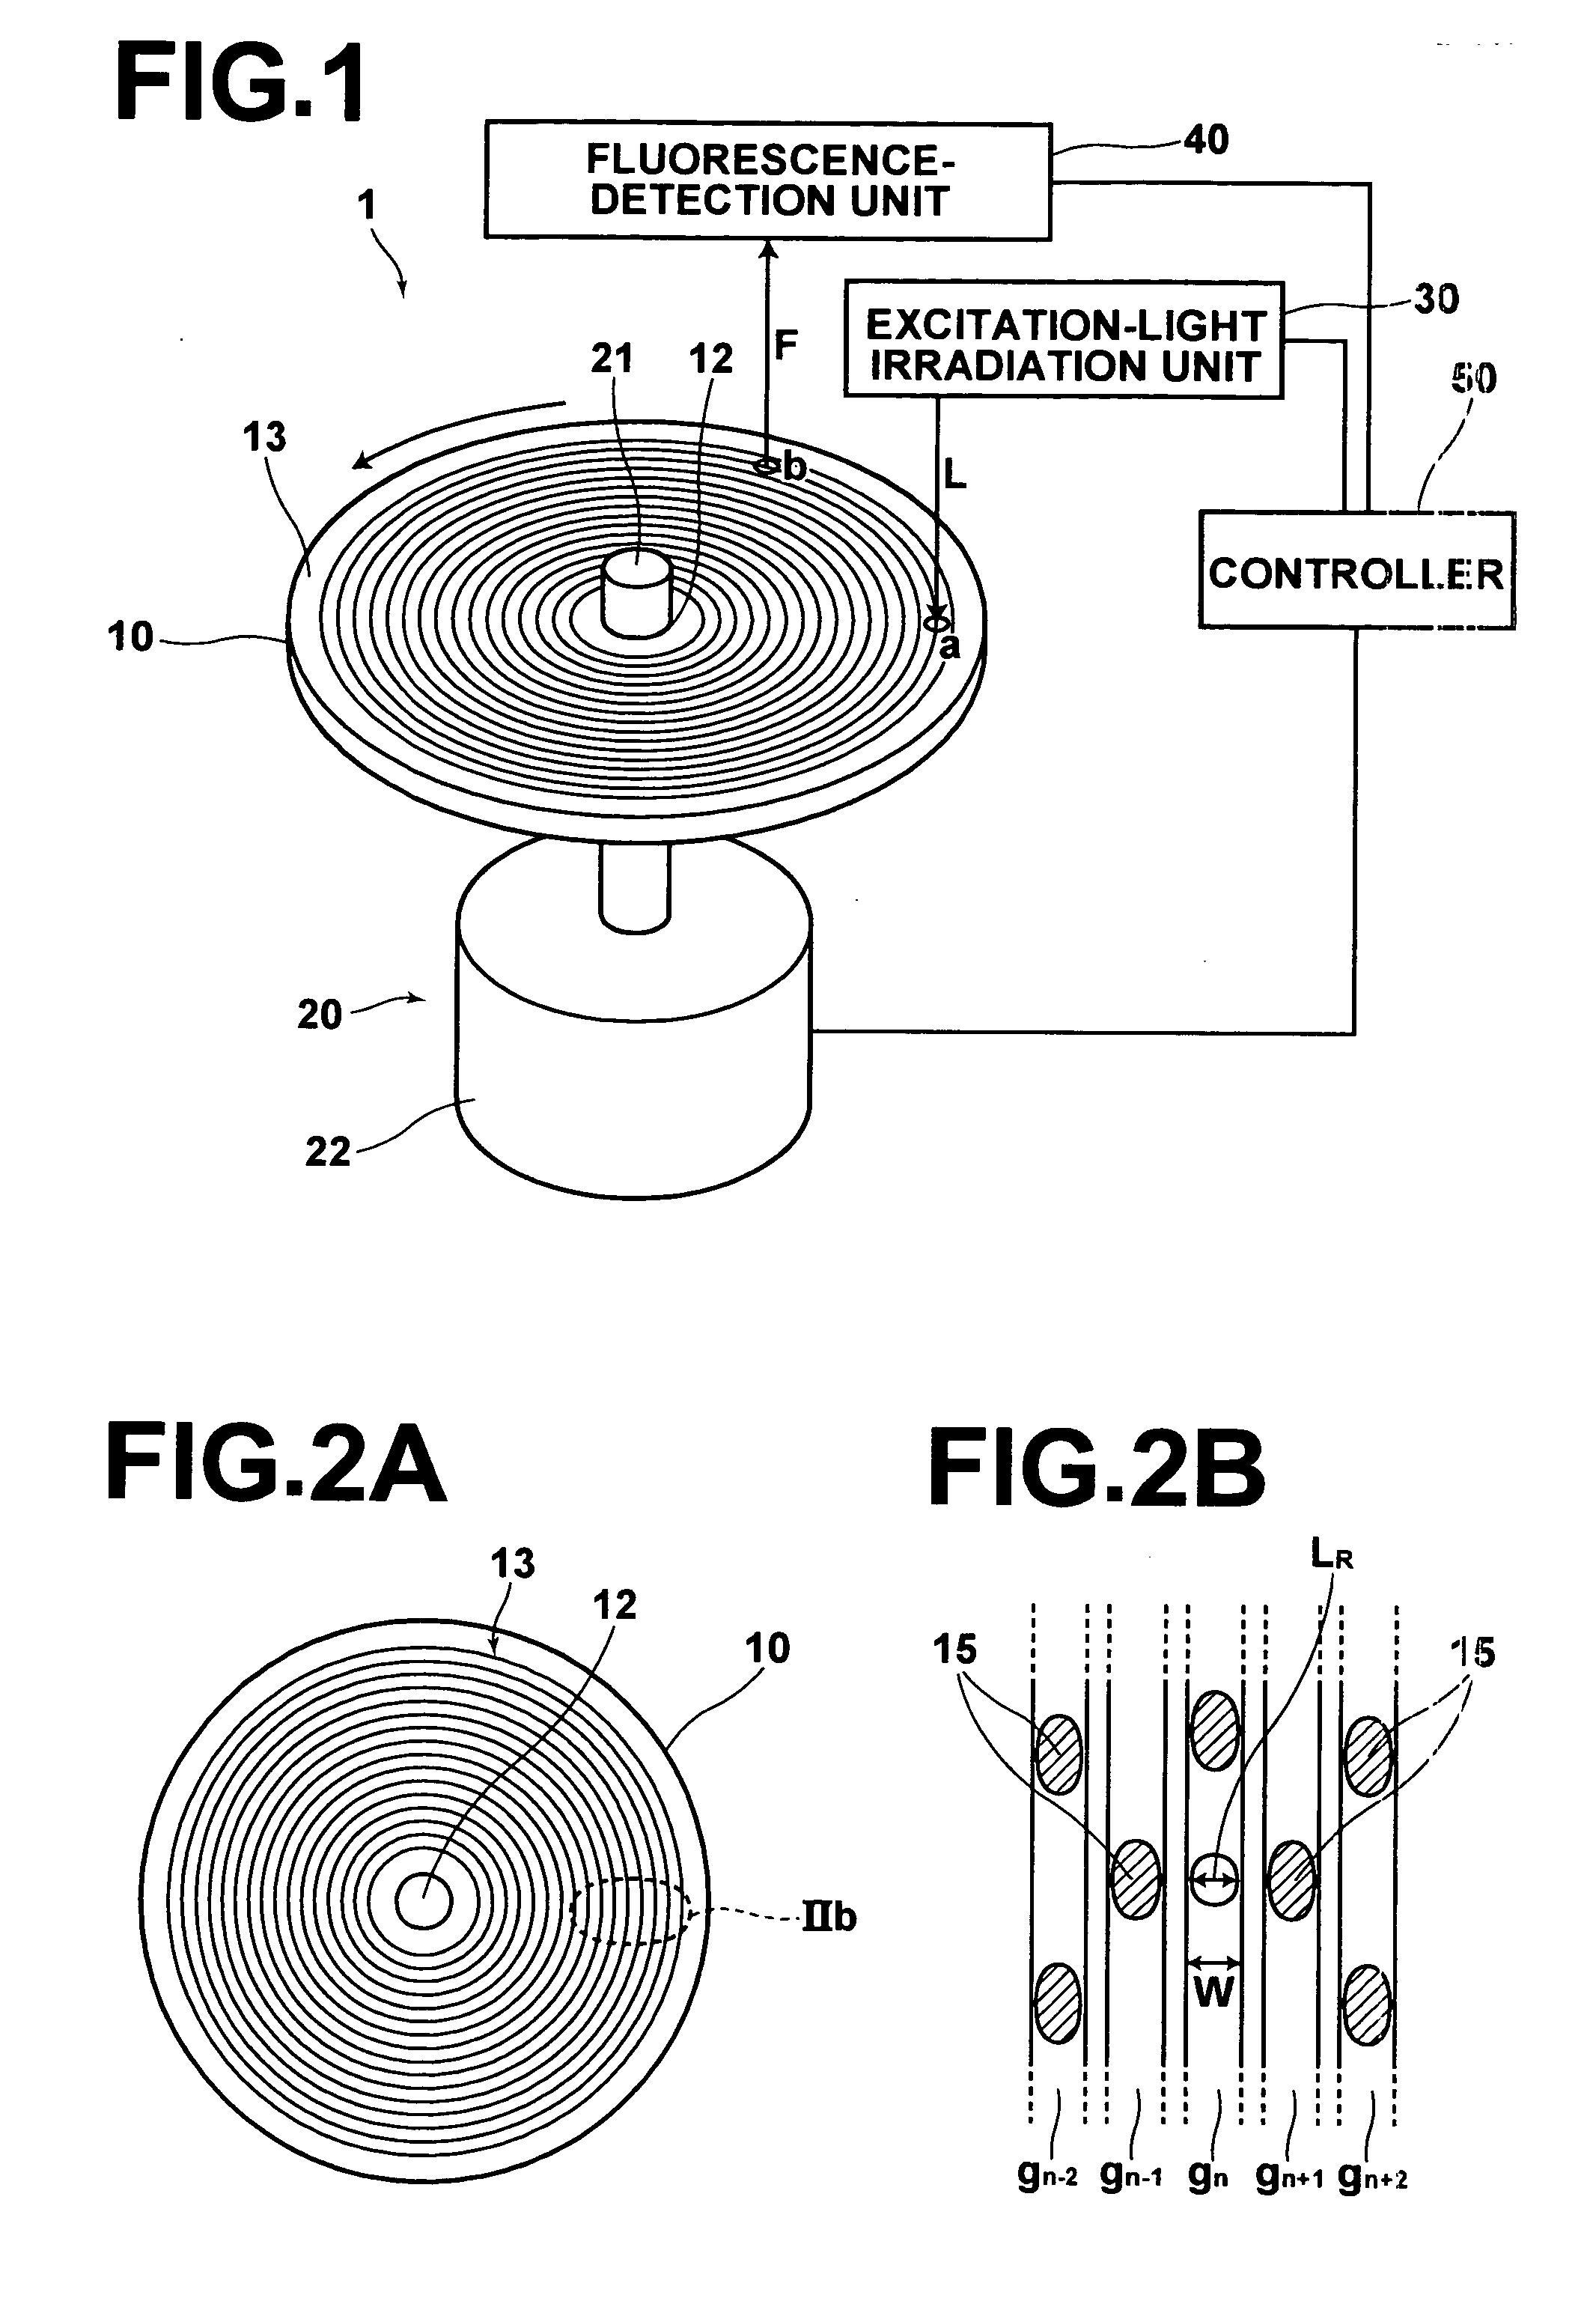 Method and system for detecting fluorescence from microarray disk